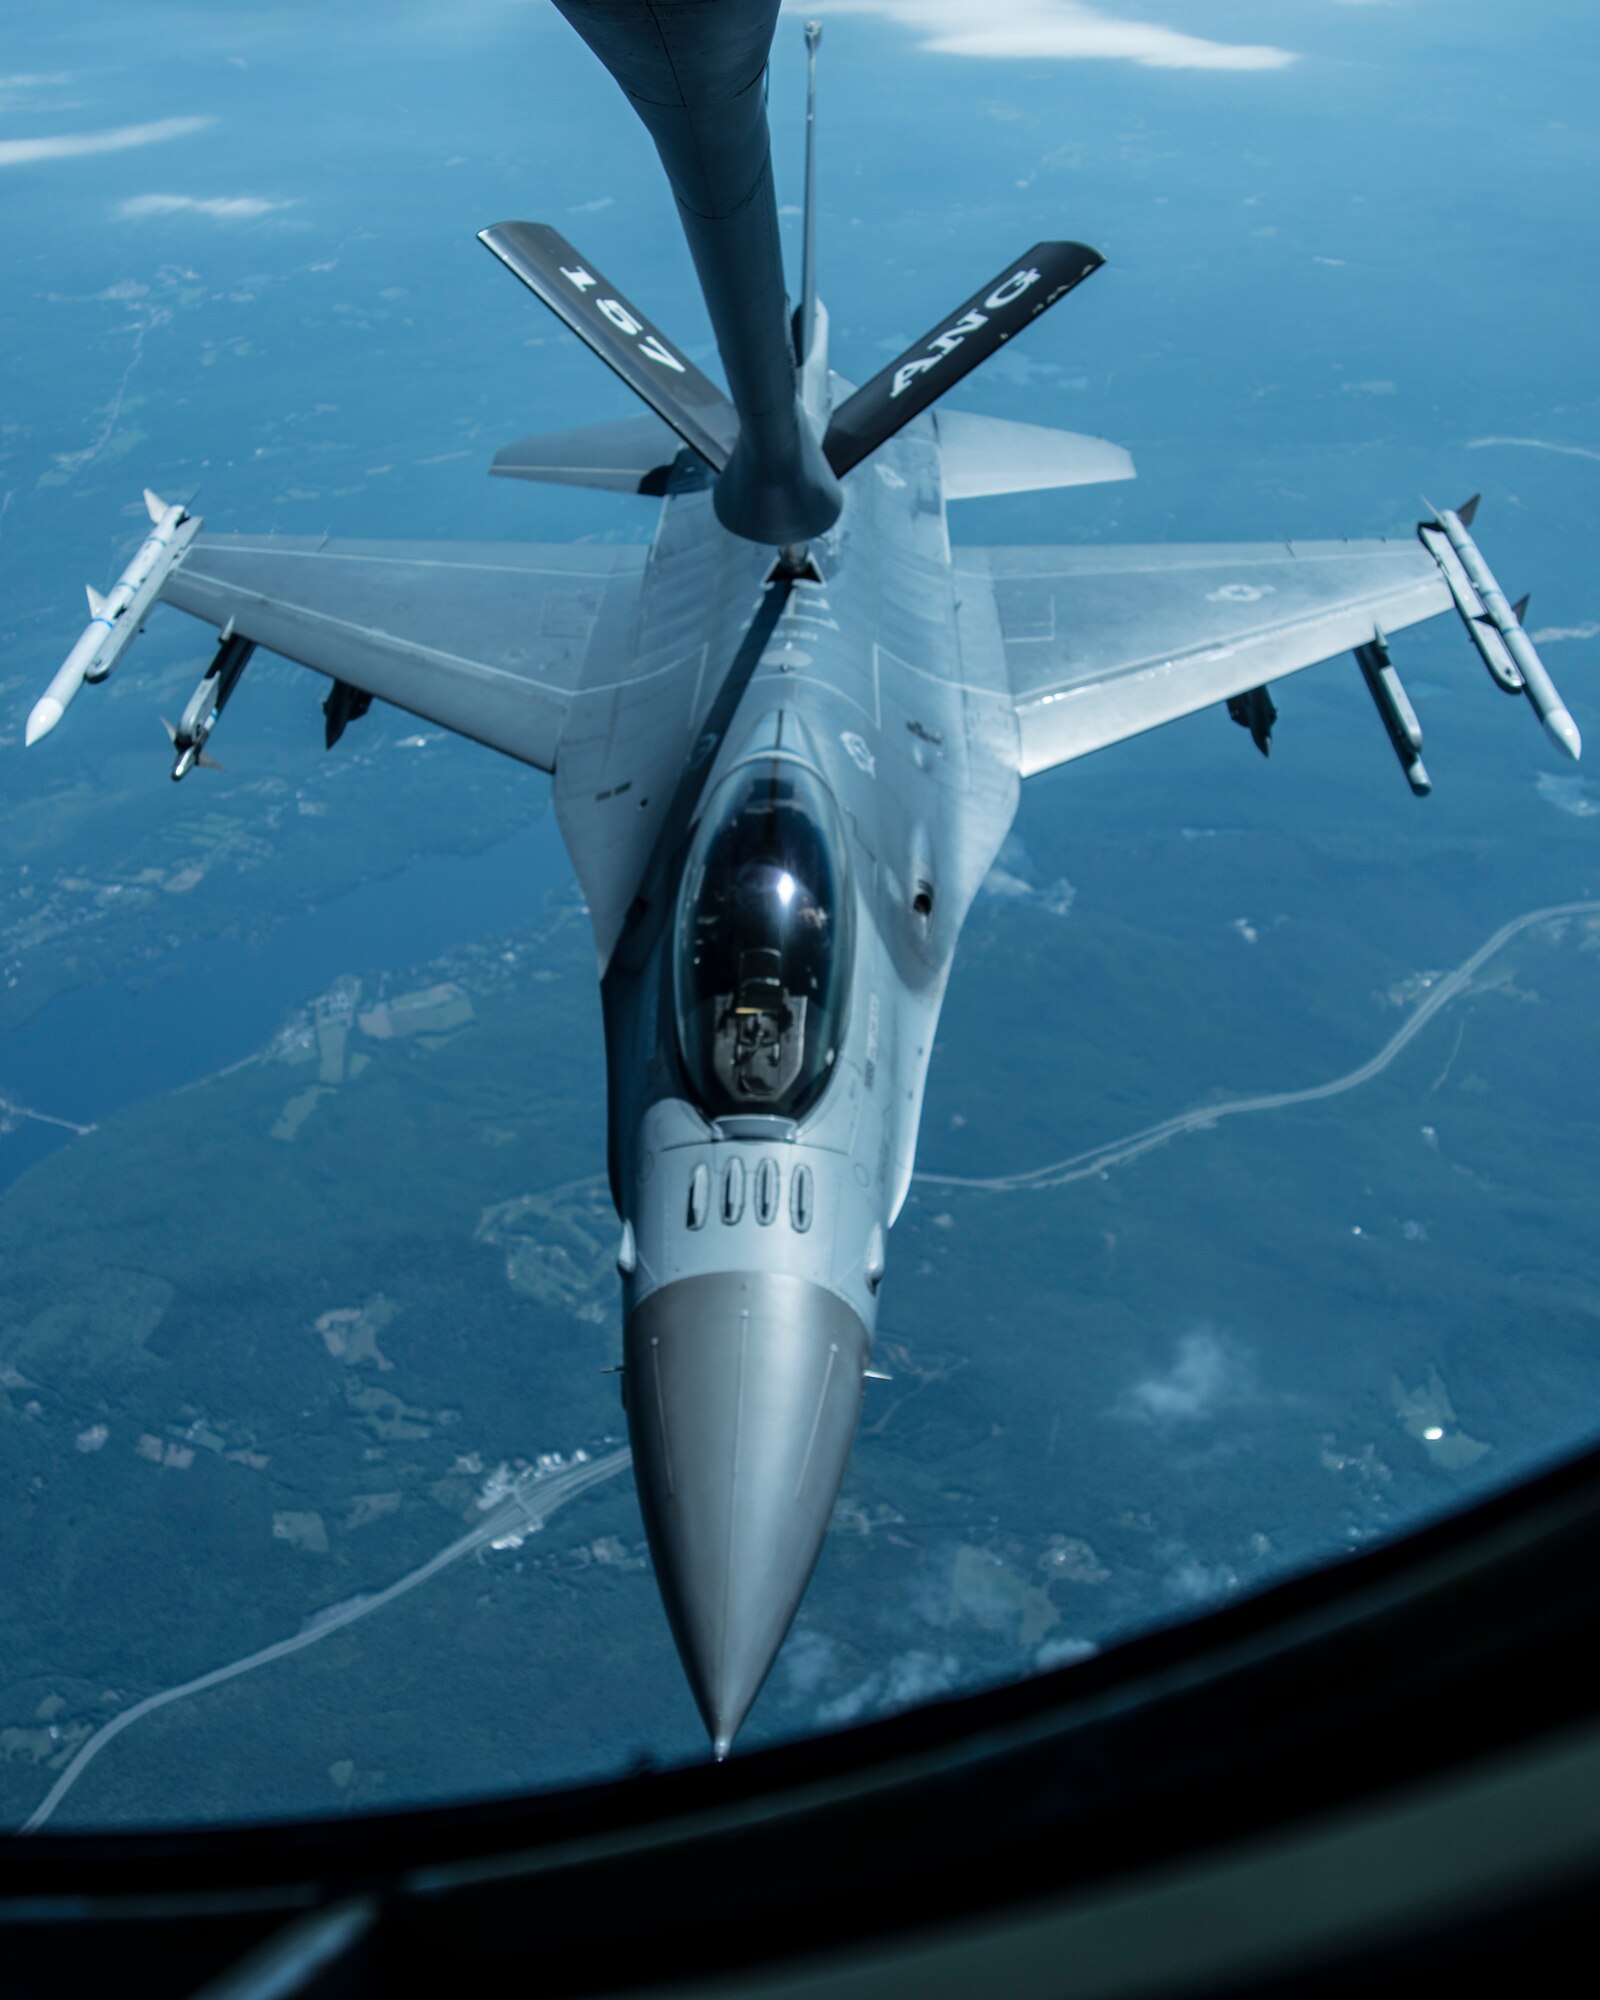 A Vermont F-16 Fighting Falcon, assigned to the 158th Fighter Wing, receives fuel from a KC-135 Stratotanker, from the 157th Refueling Wing, as part of the Boss Lift 2015,  Aug. 14, 2015. The Employer Support of the Guard and Reserve program recognizes employers of drill status guardsmen by giving them an opportunity to ride during a refueling mission. (U.S. Air National Guard photo by Airman 1st Class Jeffrey Tatro)